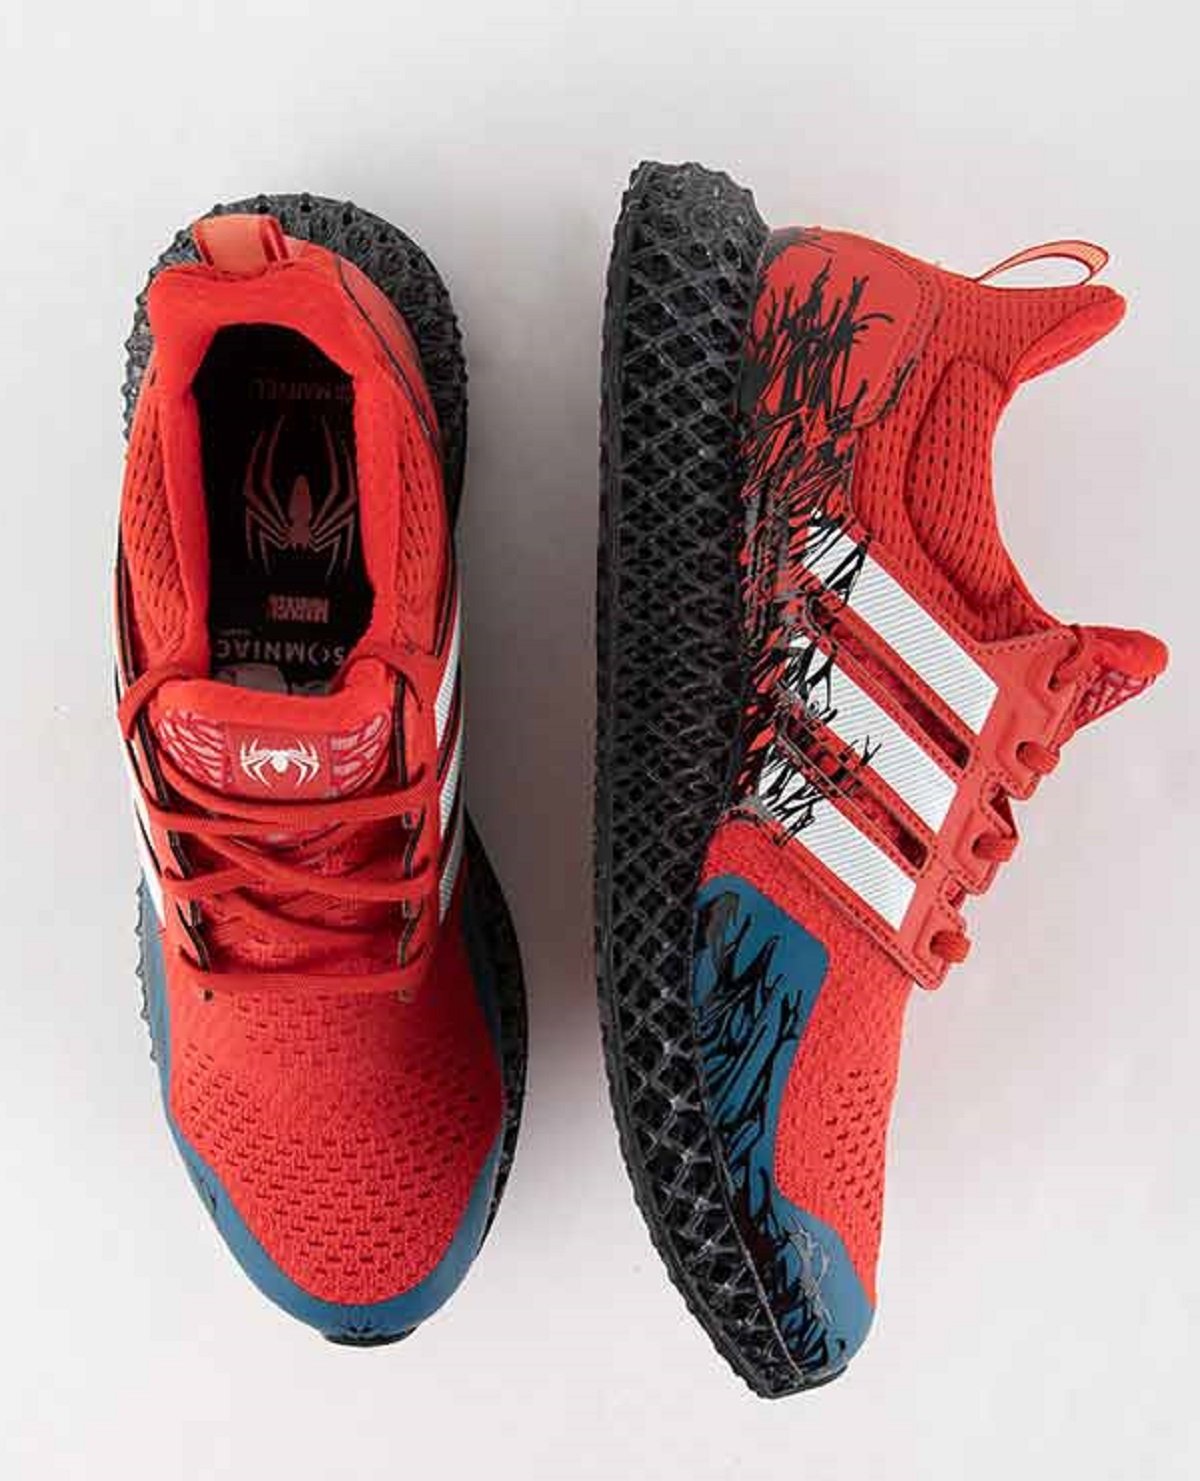 Adidas' new Marvel Spider-Man 2 shoes above view. 